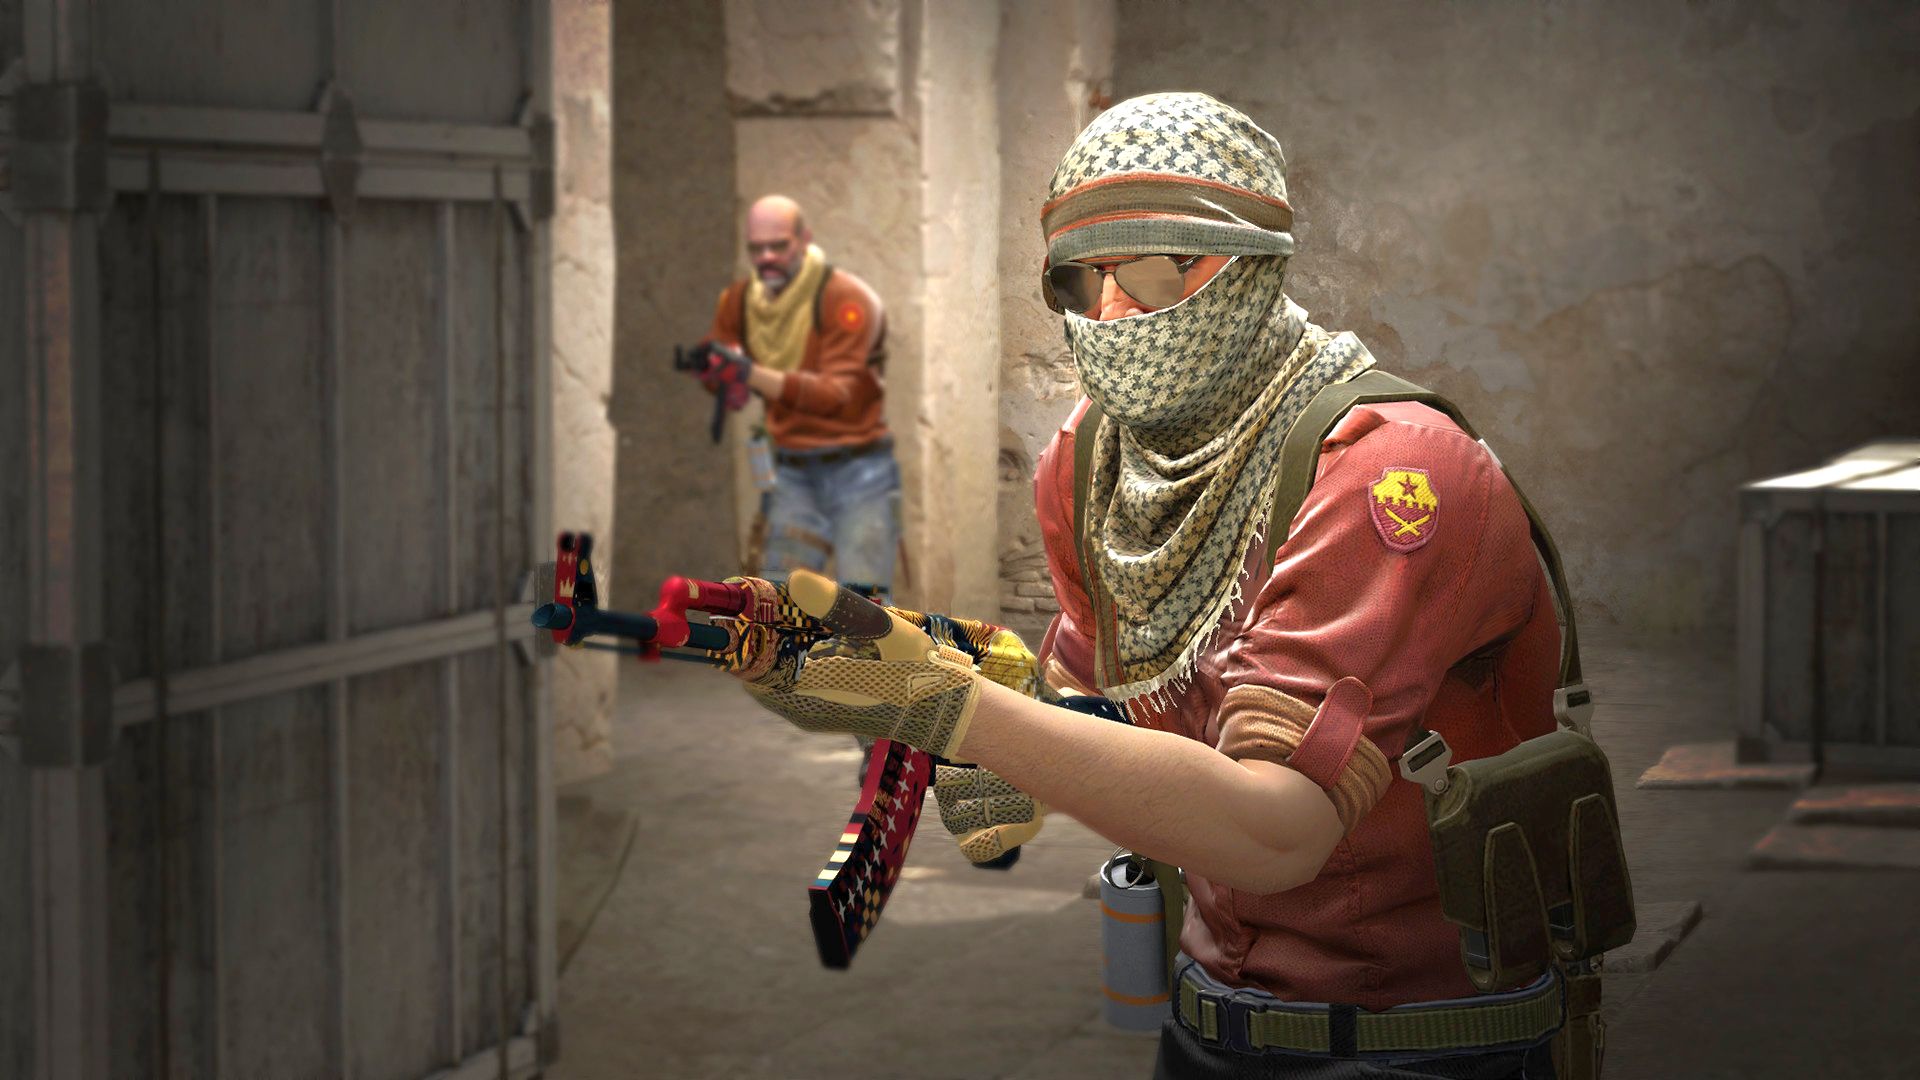 Best FPS Games: A T-side character in CS:GO keeps his AK on Dust 2